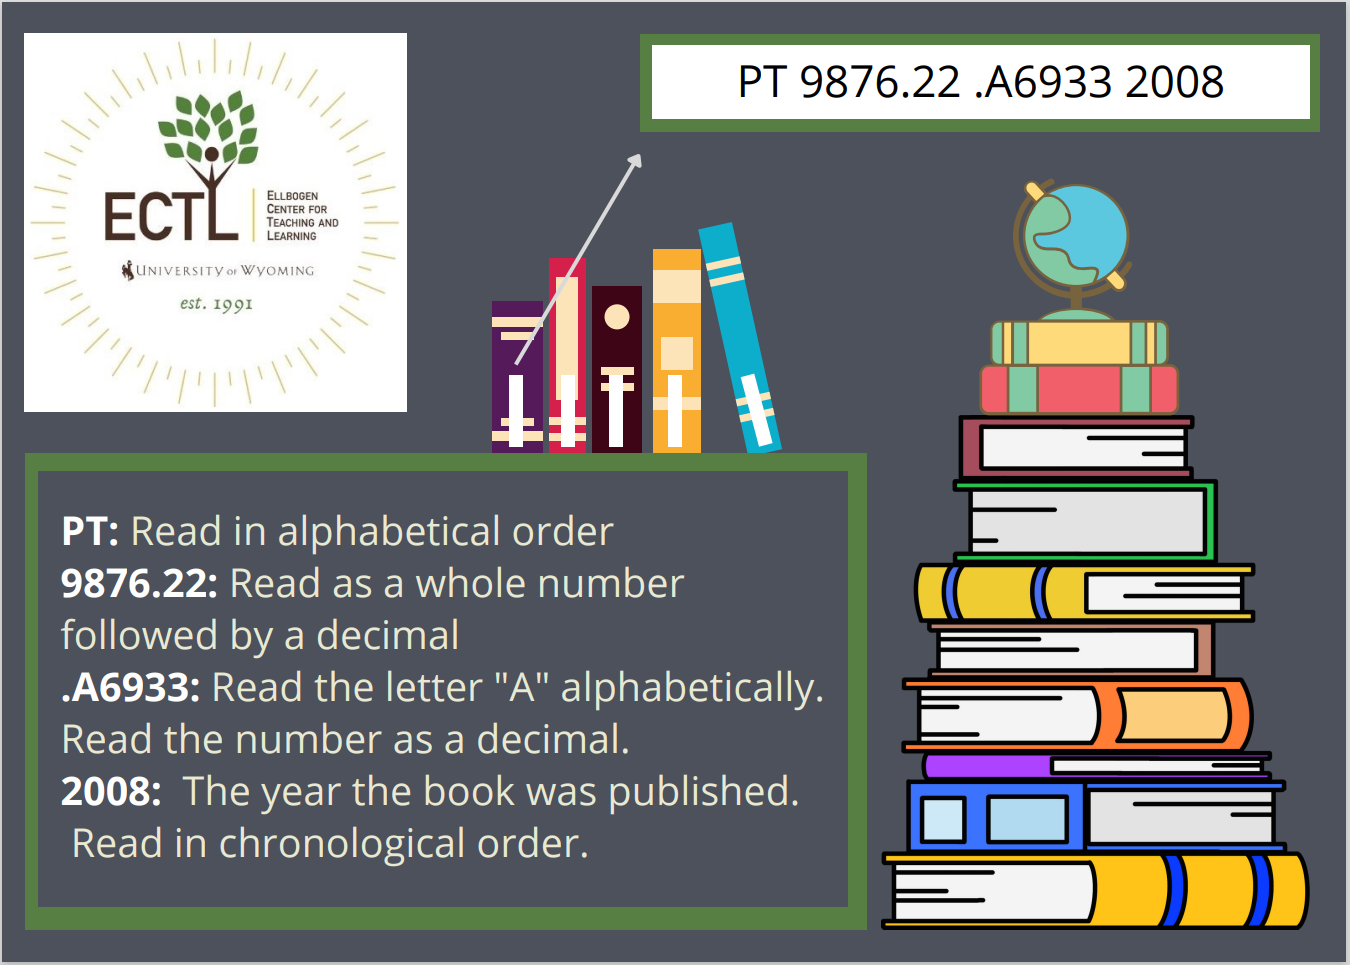 ECTL library image with ECTL logo and stack of books